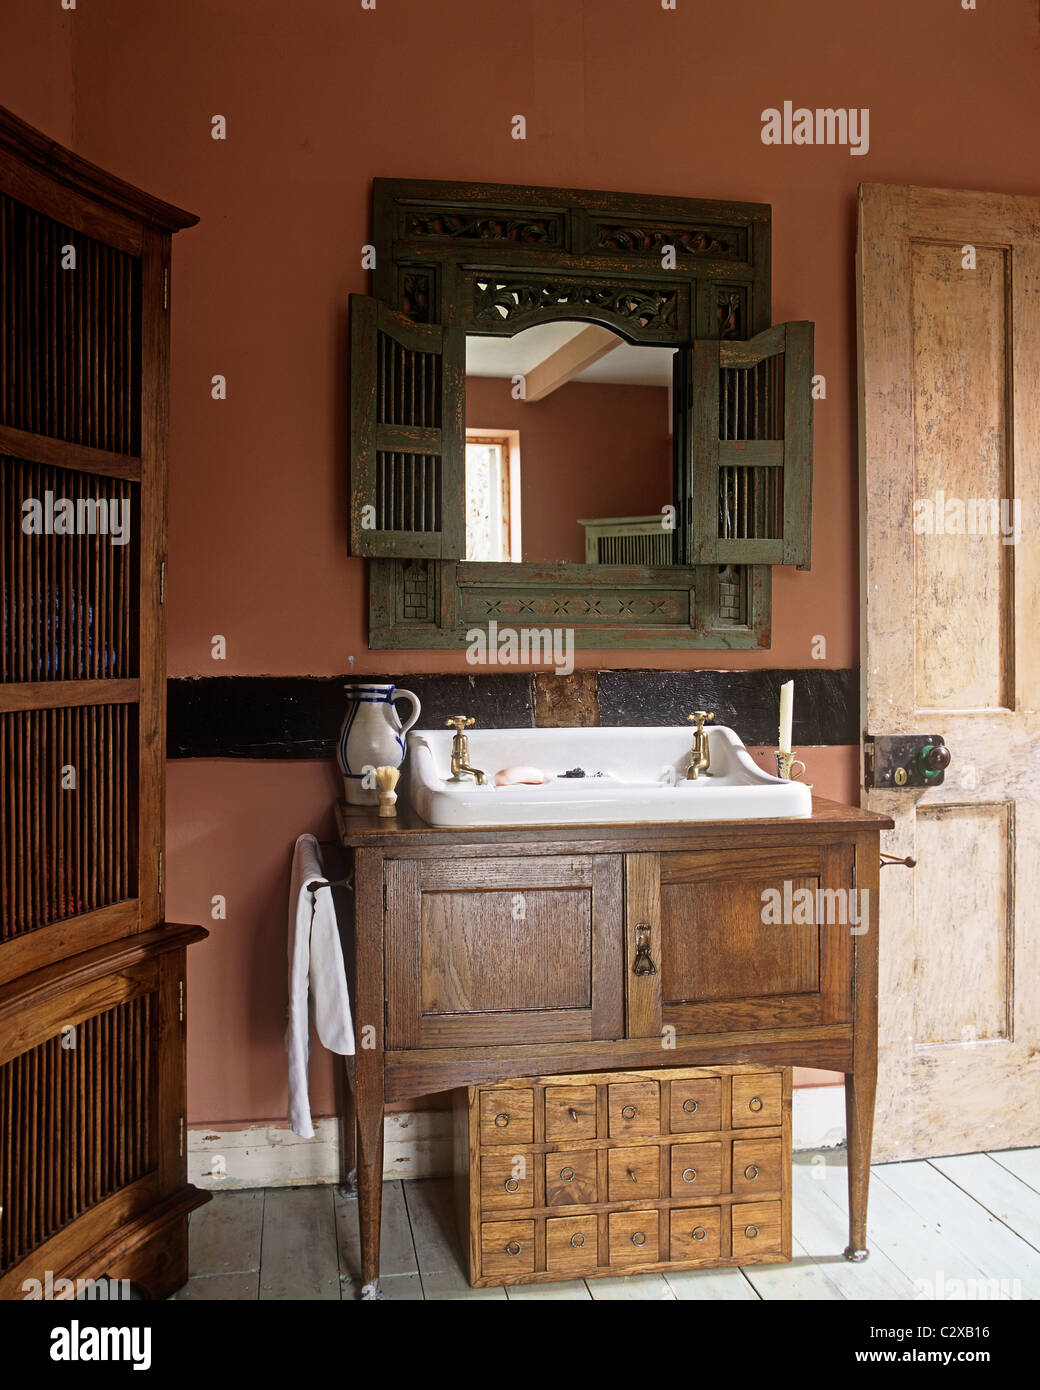 Washbasin in wooden cupboard in red, country style bathroom Stock Photo